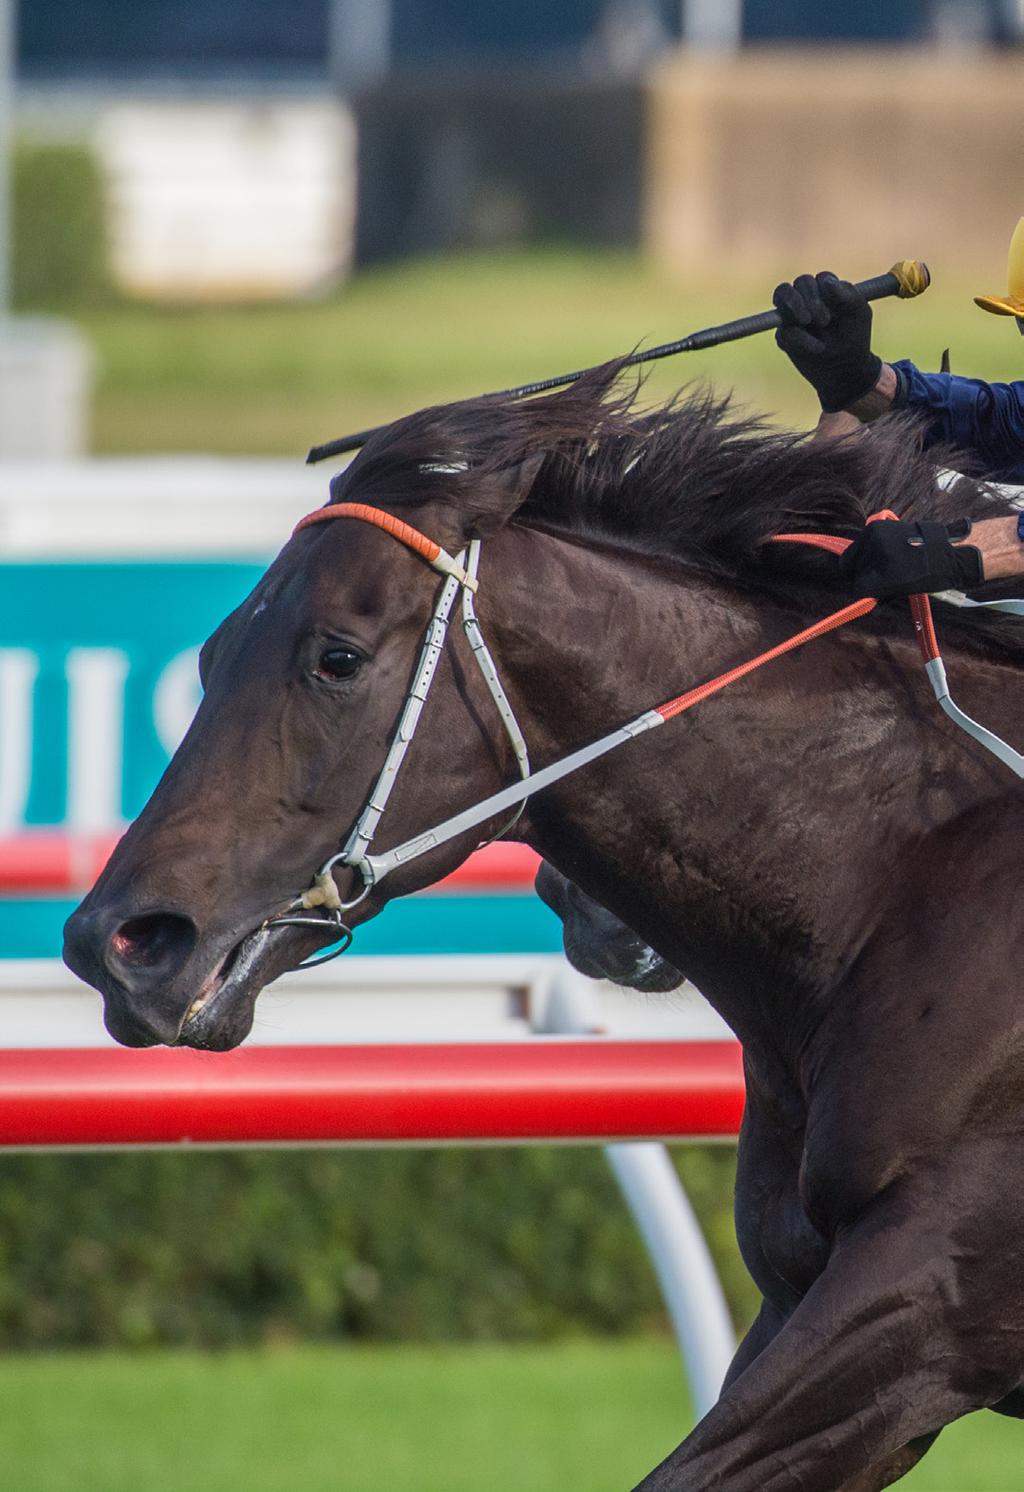 8 APRIL, 2019 Media@ WaikatoStud Top weekend on the track for horses sired by WS stallions Brutal on